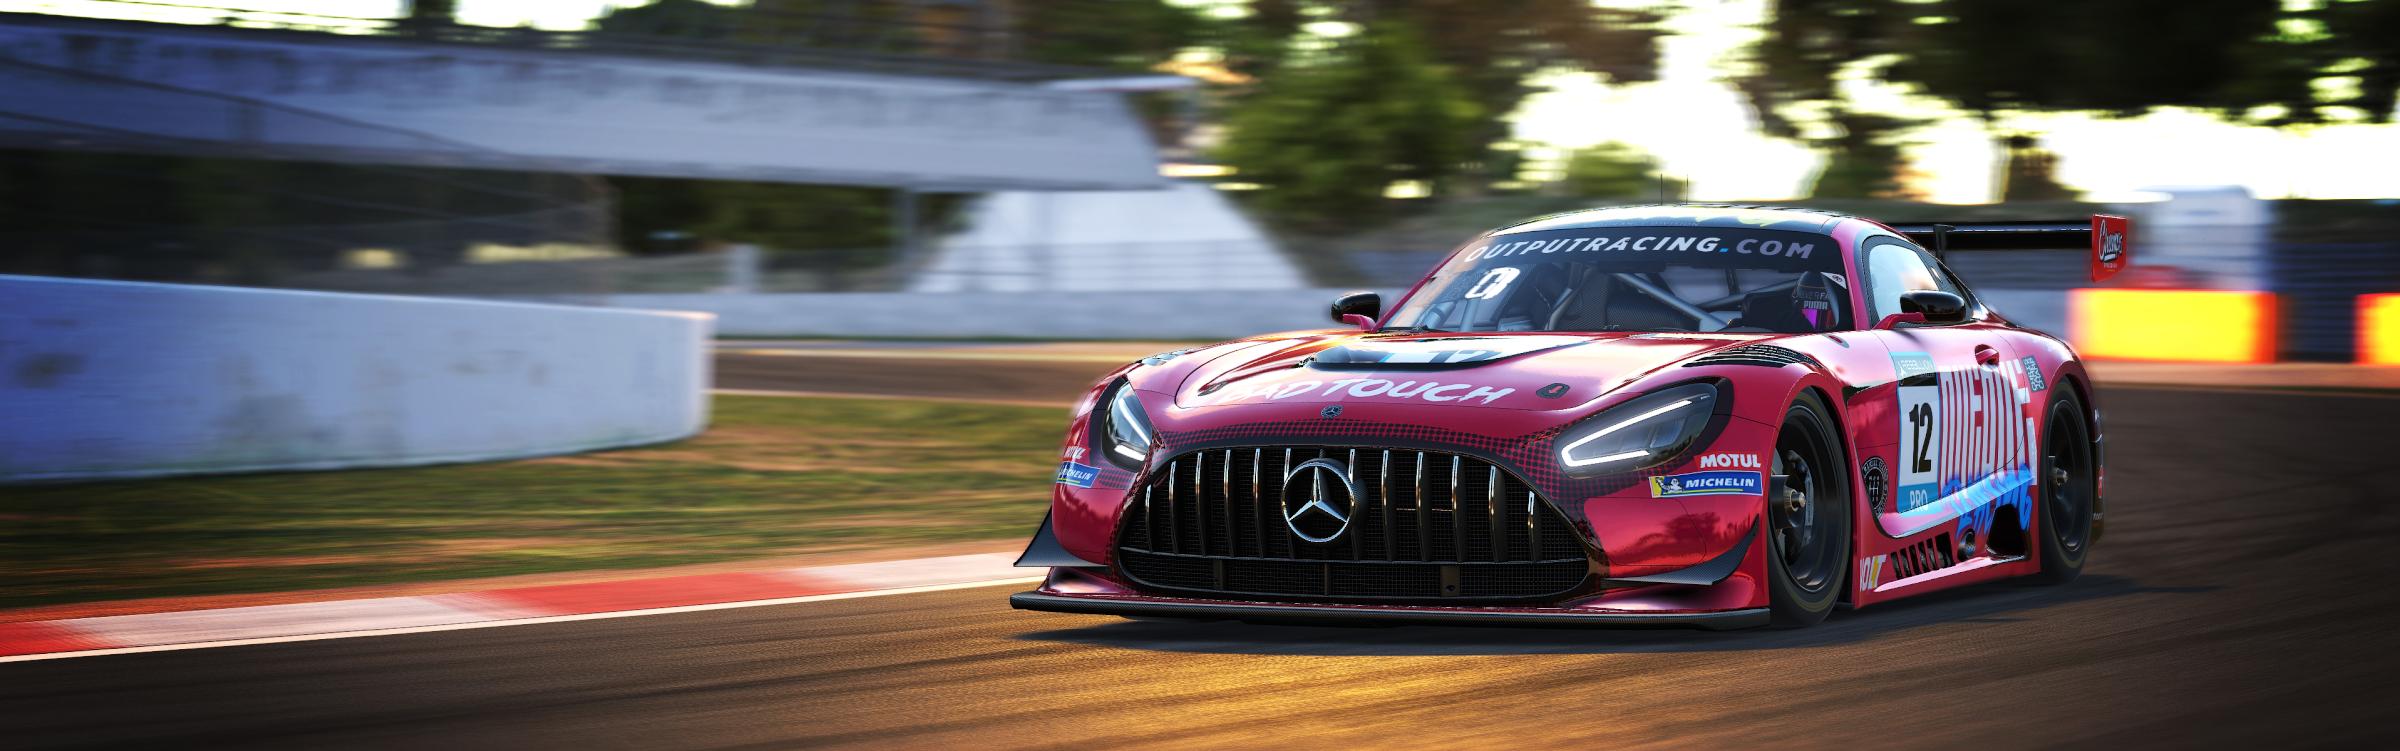 Preview of Output Racing 24Hr of Spa Mercedes GT3 by Chris Champeau